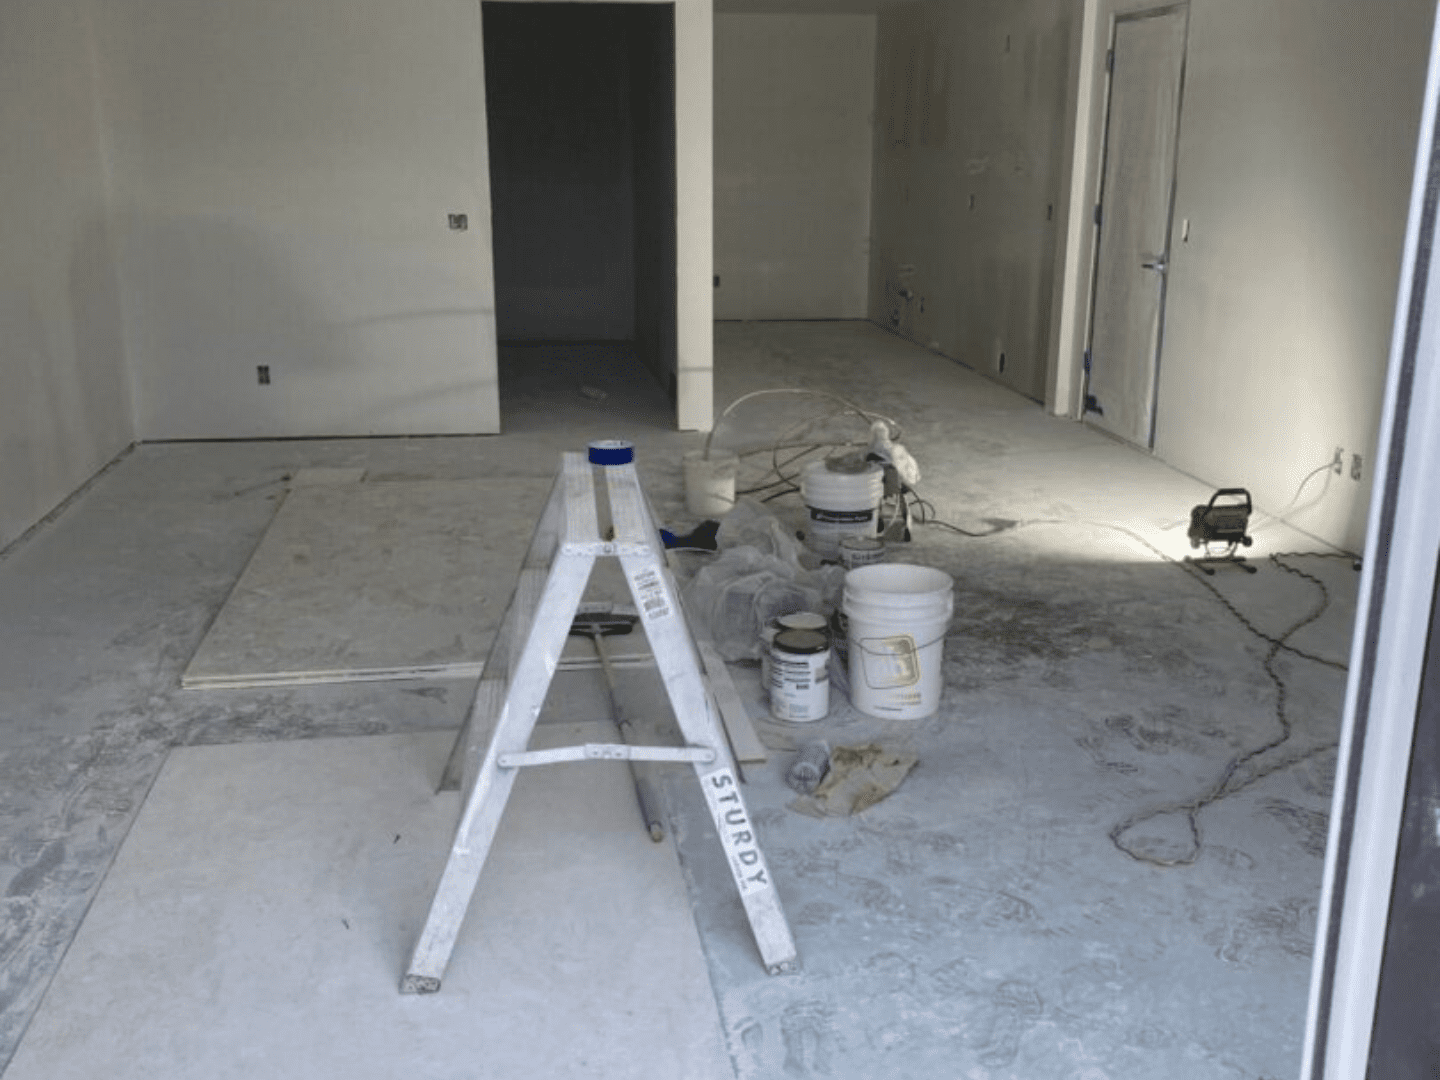 A ladder and buckets in an unfinished room.